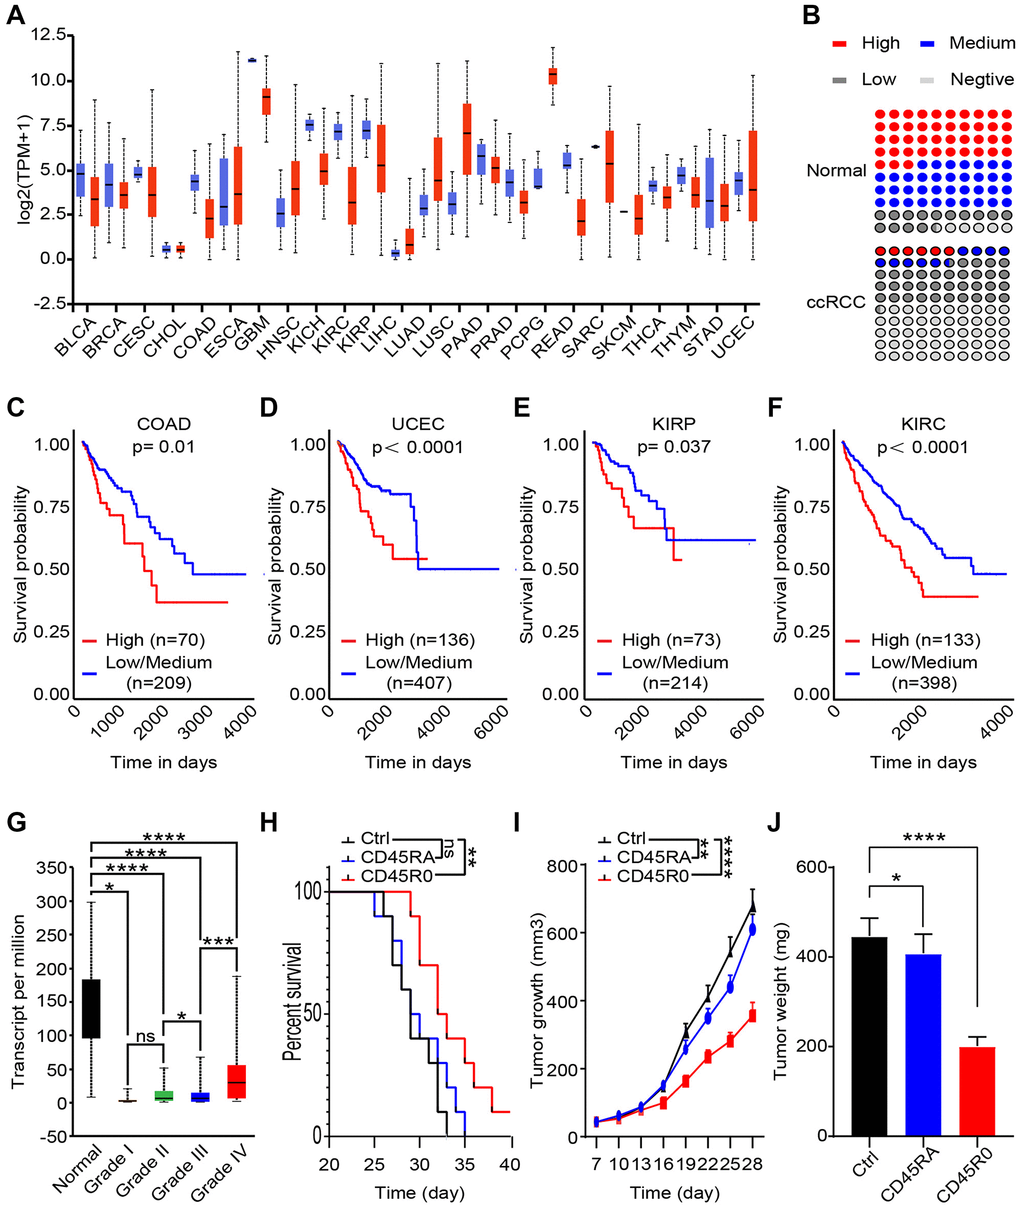 CD45RO+CD8+ T cells inhibit ccRCC progression, while CD45RO predicts poor prognosis. CD45RO level from database and clinical specimen were analyzed to explore the potential clinical diagnose and treat value. (A) UCHL1 transcript level in 24 cancers tissues compare to normal tissues. (B) Statistics of IHC positive rate of CD45RO in ccRCC tissues and normal renal tissues. (C, D, E, F) UCHL1 transcript levels of colonic adenocarcinoma (COAD) (C), uterine corpus endometrial carcinoma (UCEC) (D), kidney renal clear cell carcinoma (KIRP) (E) and kidney renal clear cell carcinoma (KIRC) (F). (G) UCHL1 transcript levels of normal renal tissues and different degree ccRCC tissues. (H, I, J) We injected 108 CD45RO+CD8+ T cells or CD45RO+CD8+ T cells per week after ccRCC model successfully established. Survival time, tumor growth rate and tumor weight were recorded.